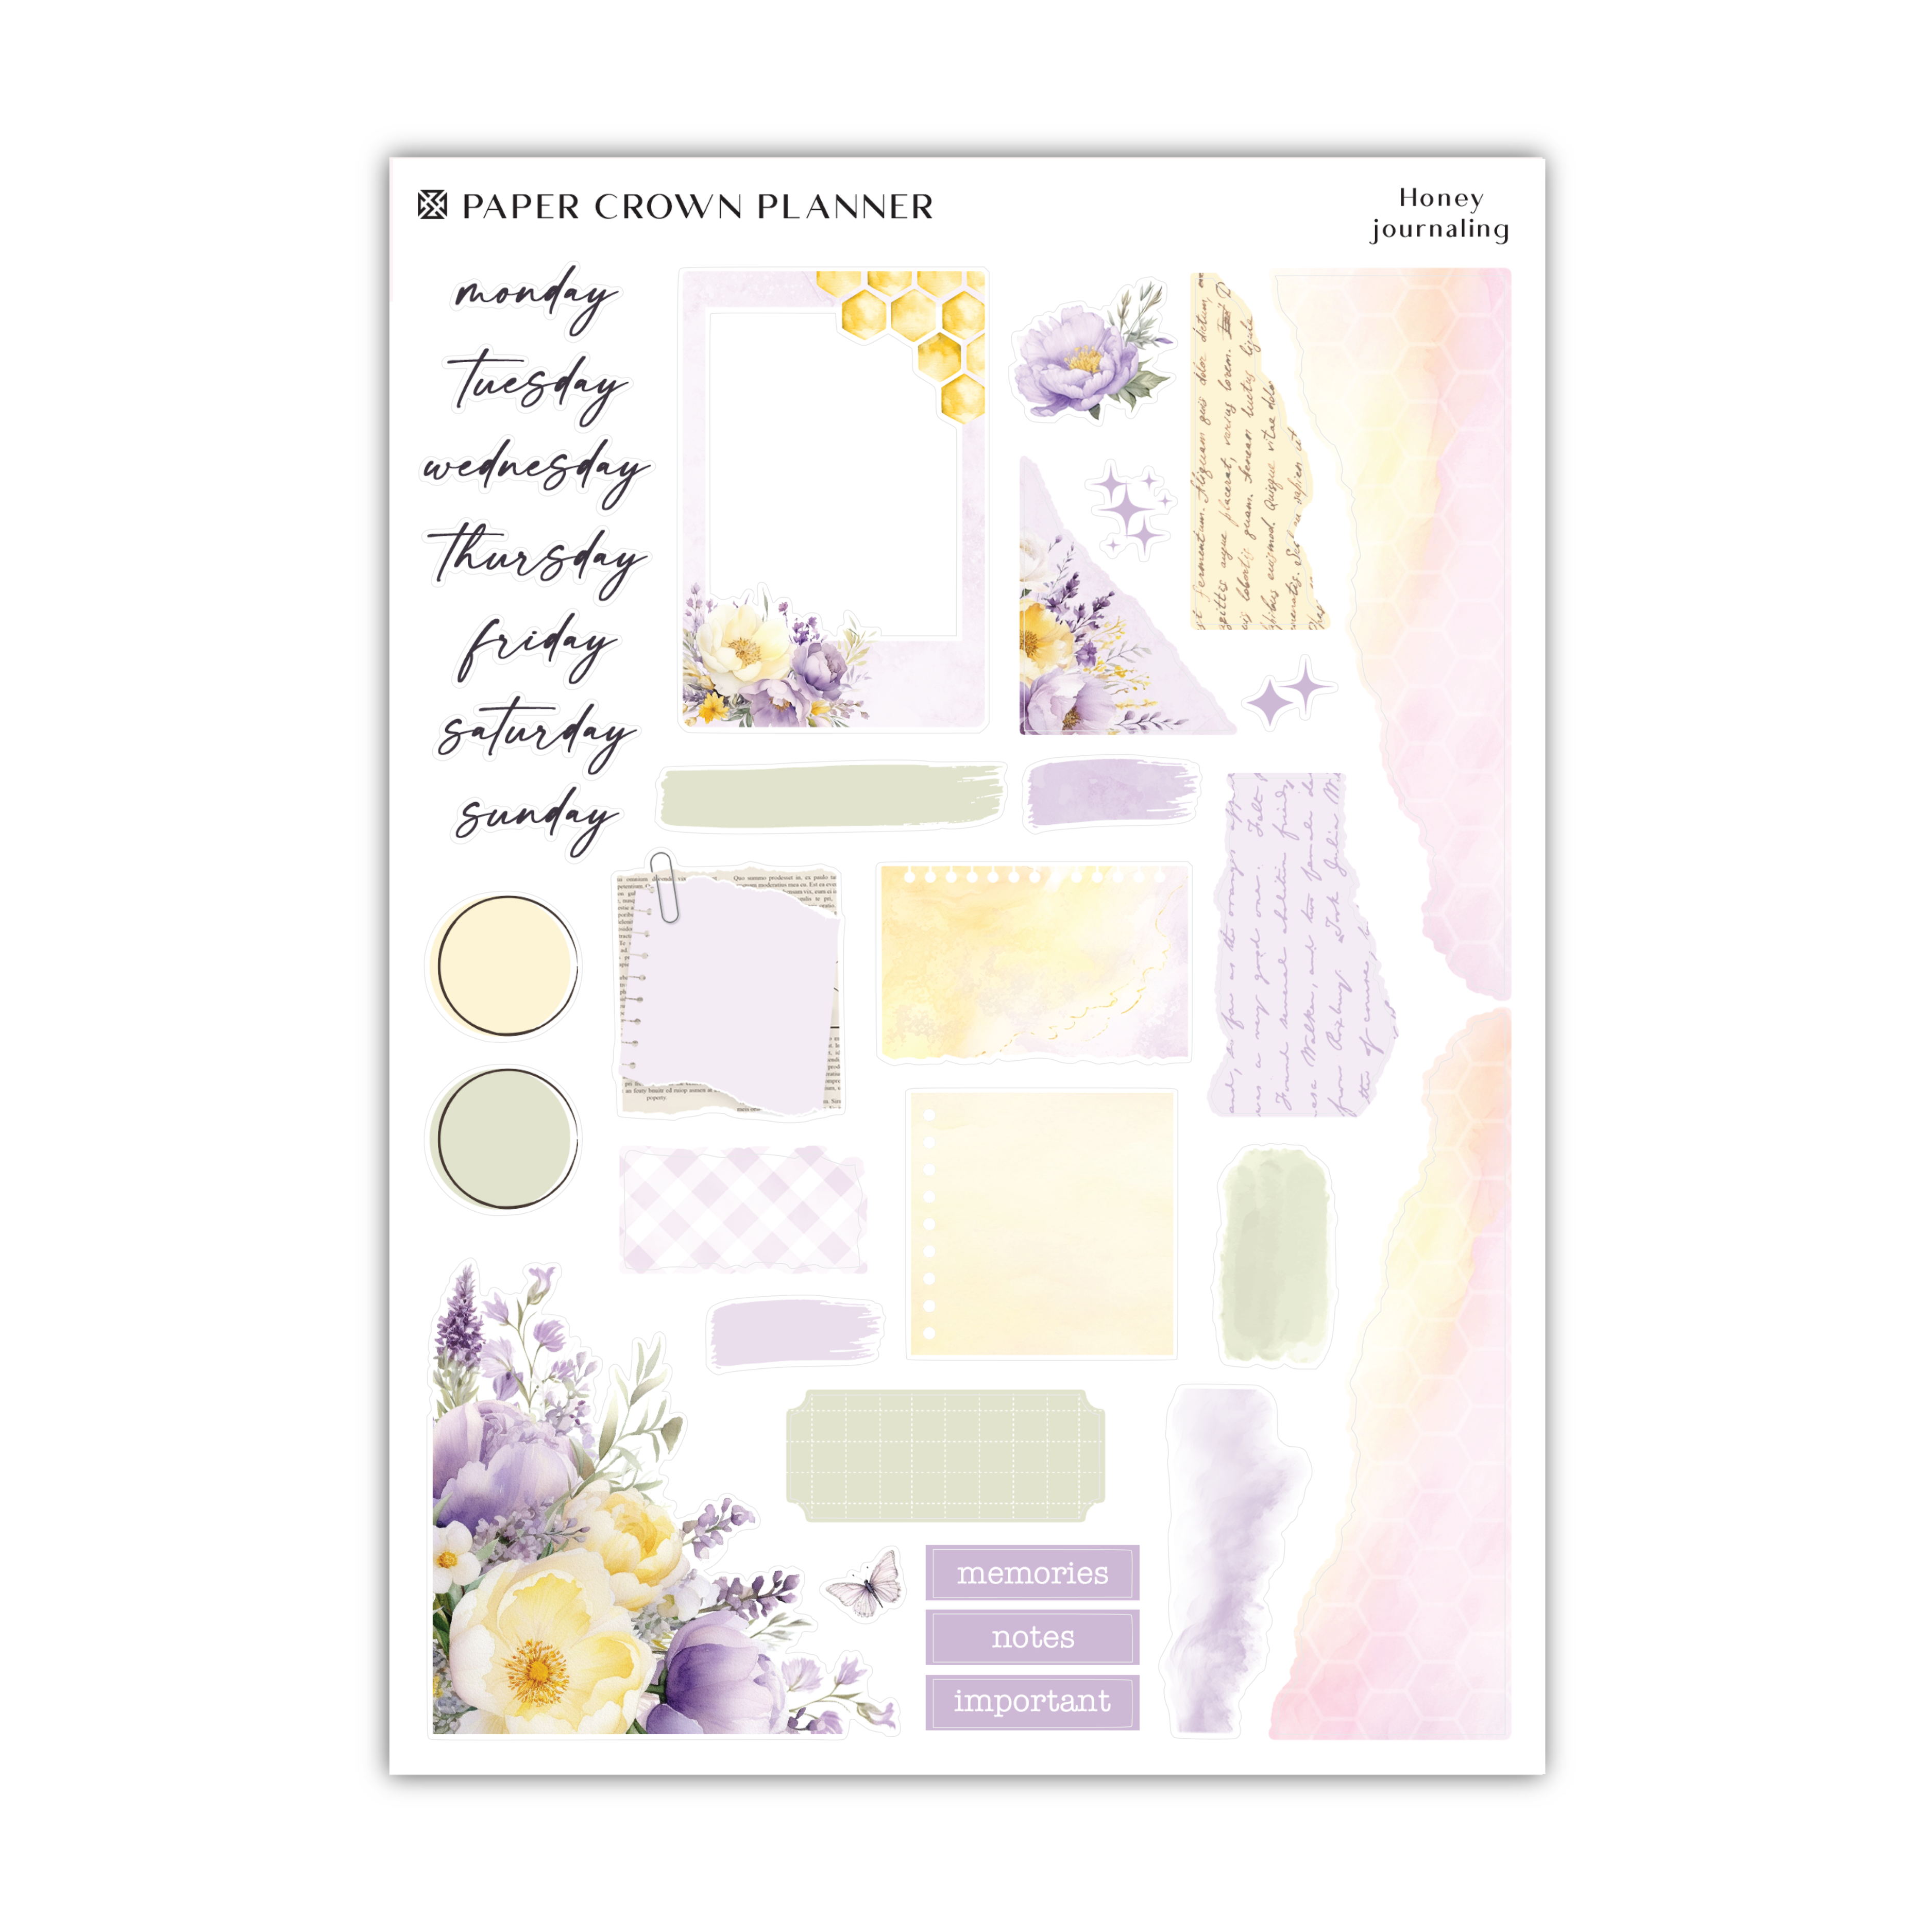 a paper crown planner with flowers and pastel colors